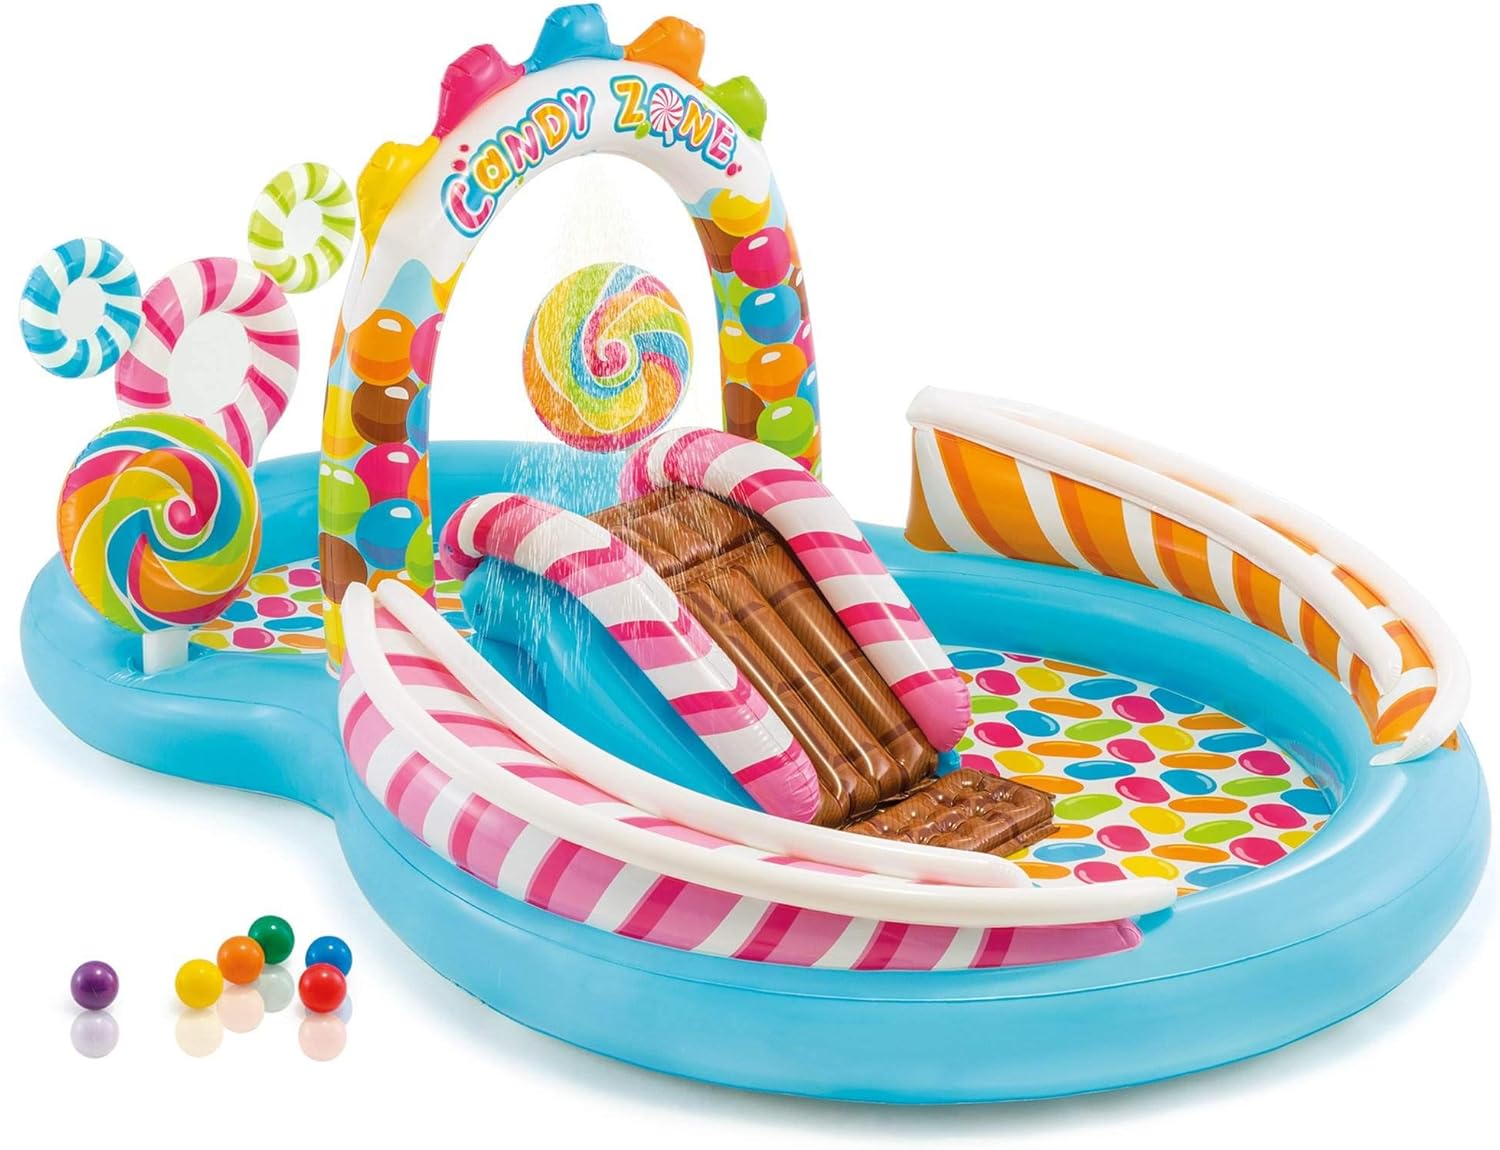 Intex 9ft x 6ft x 51in Kids Inflatable Candy Zone Play Center Pool w/Waterslide